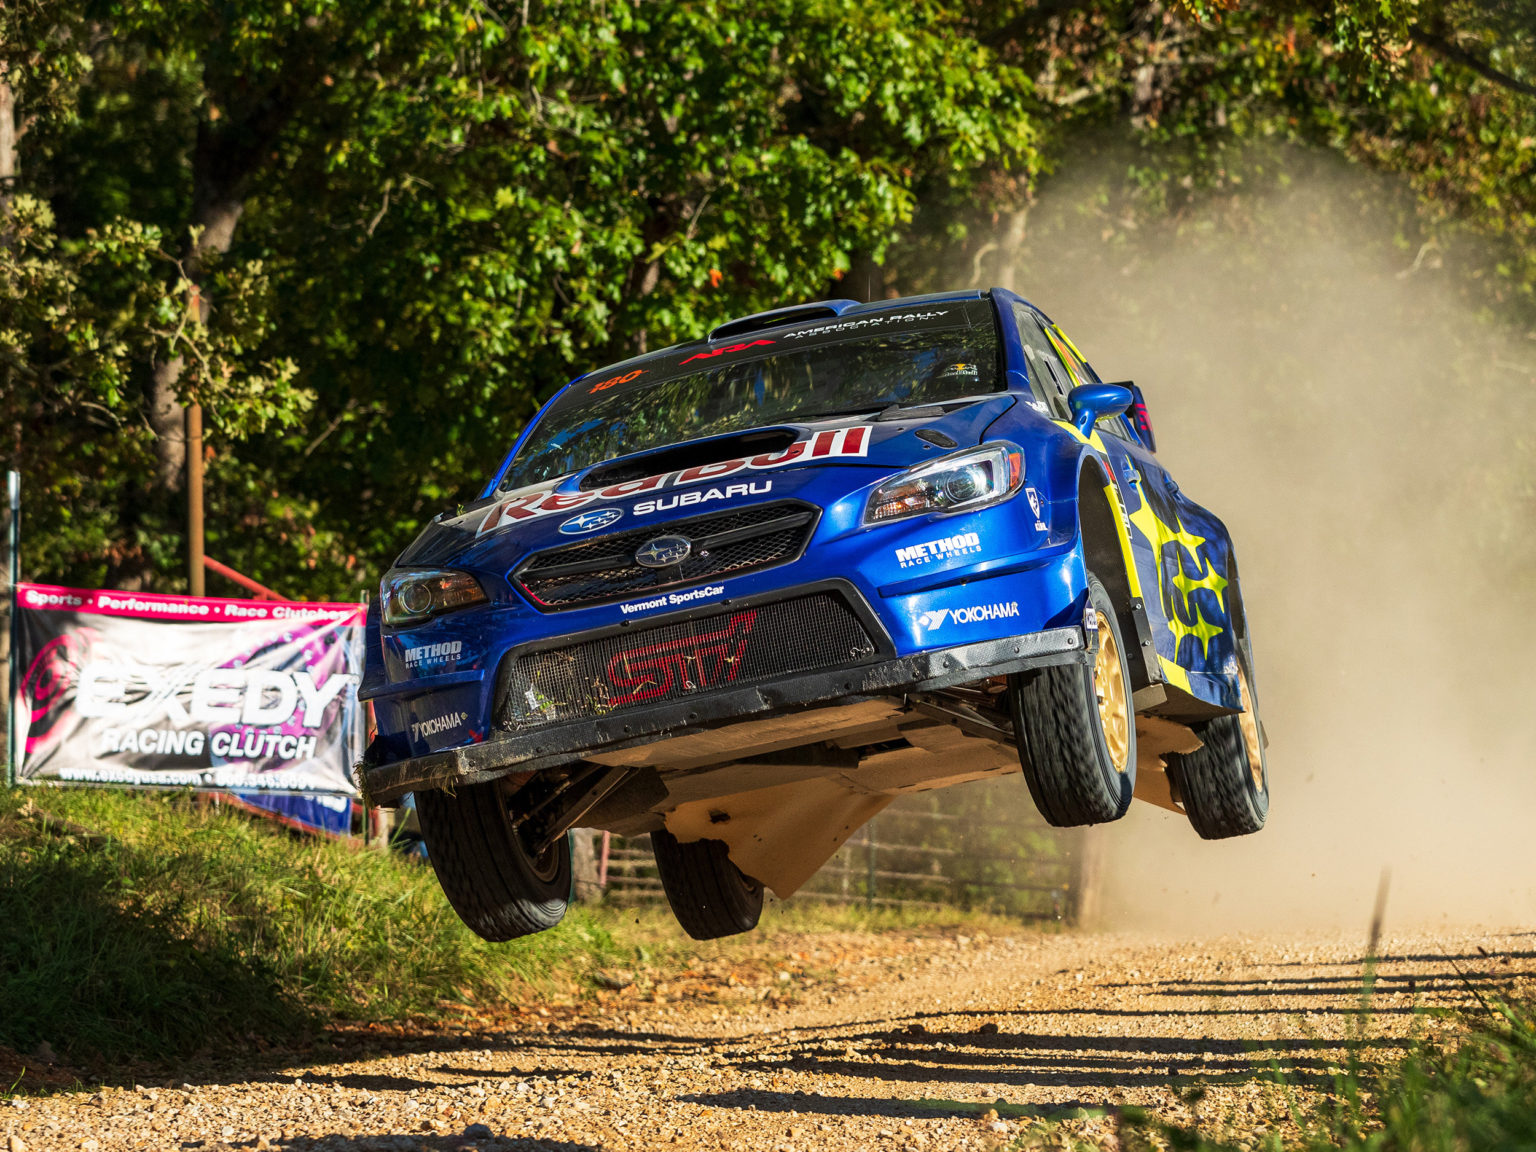 Subaru Motorsports takes center stage in the newest season of "Launch Control".